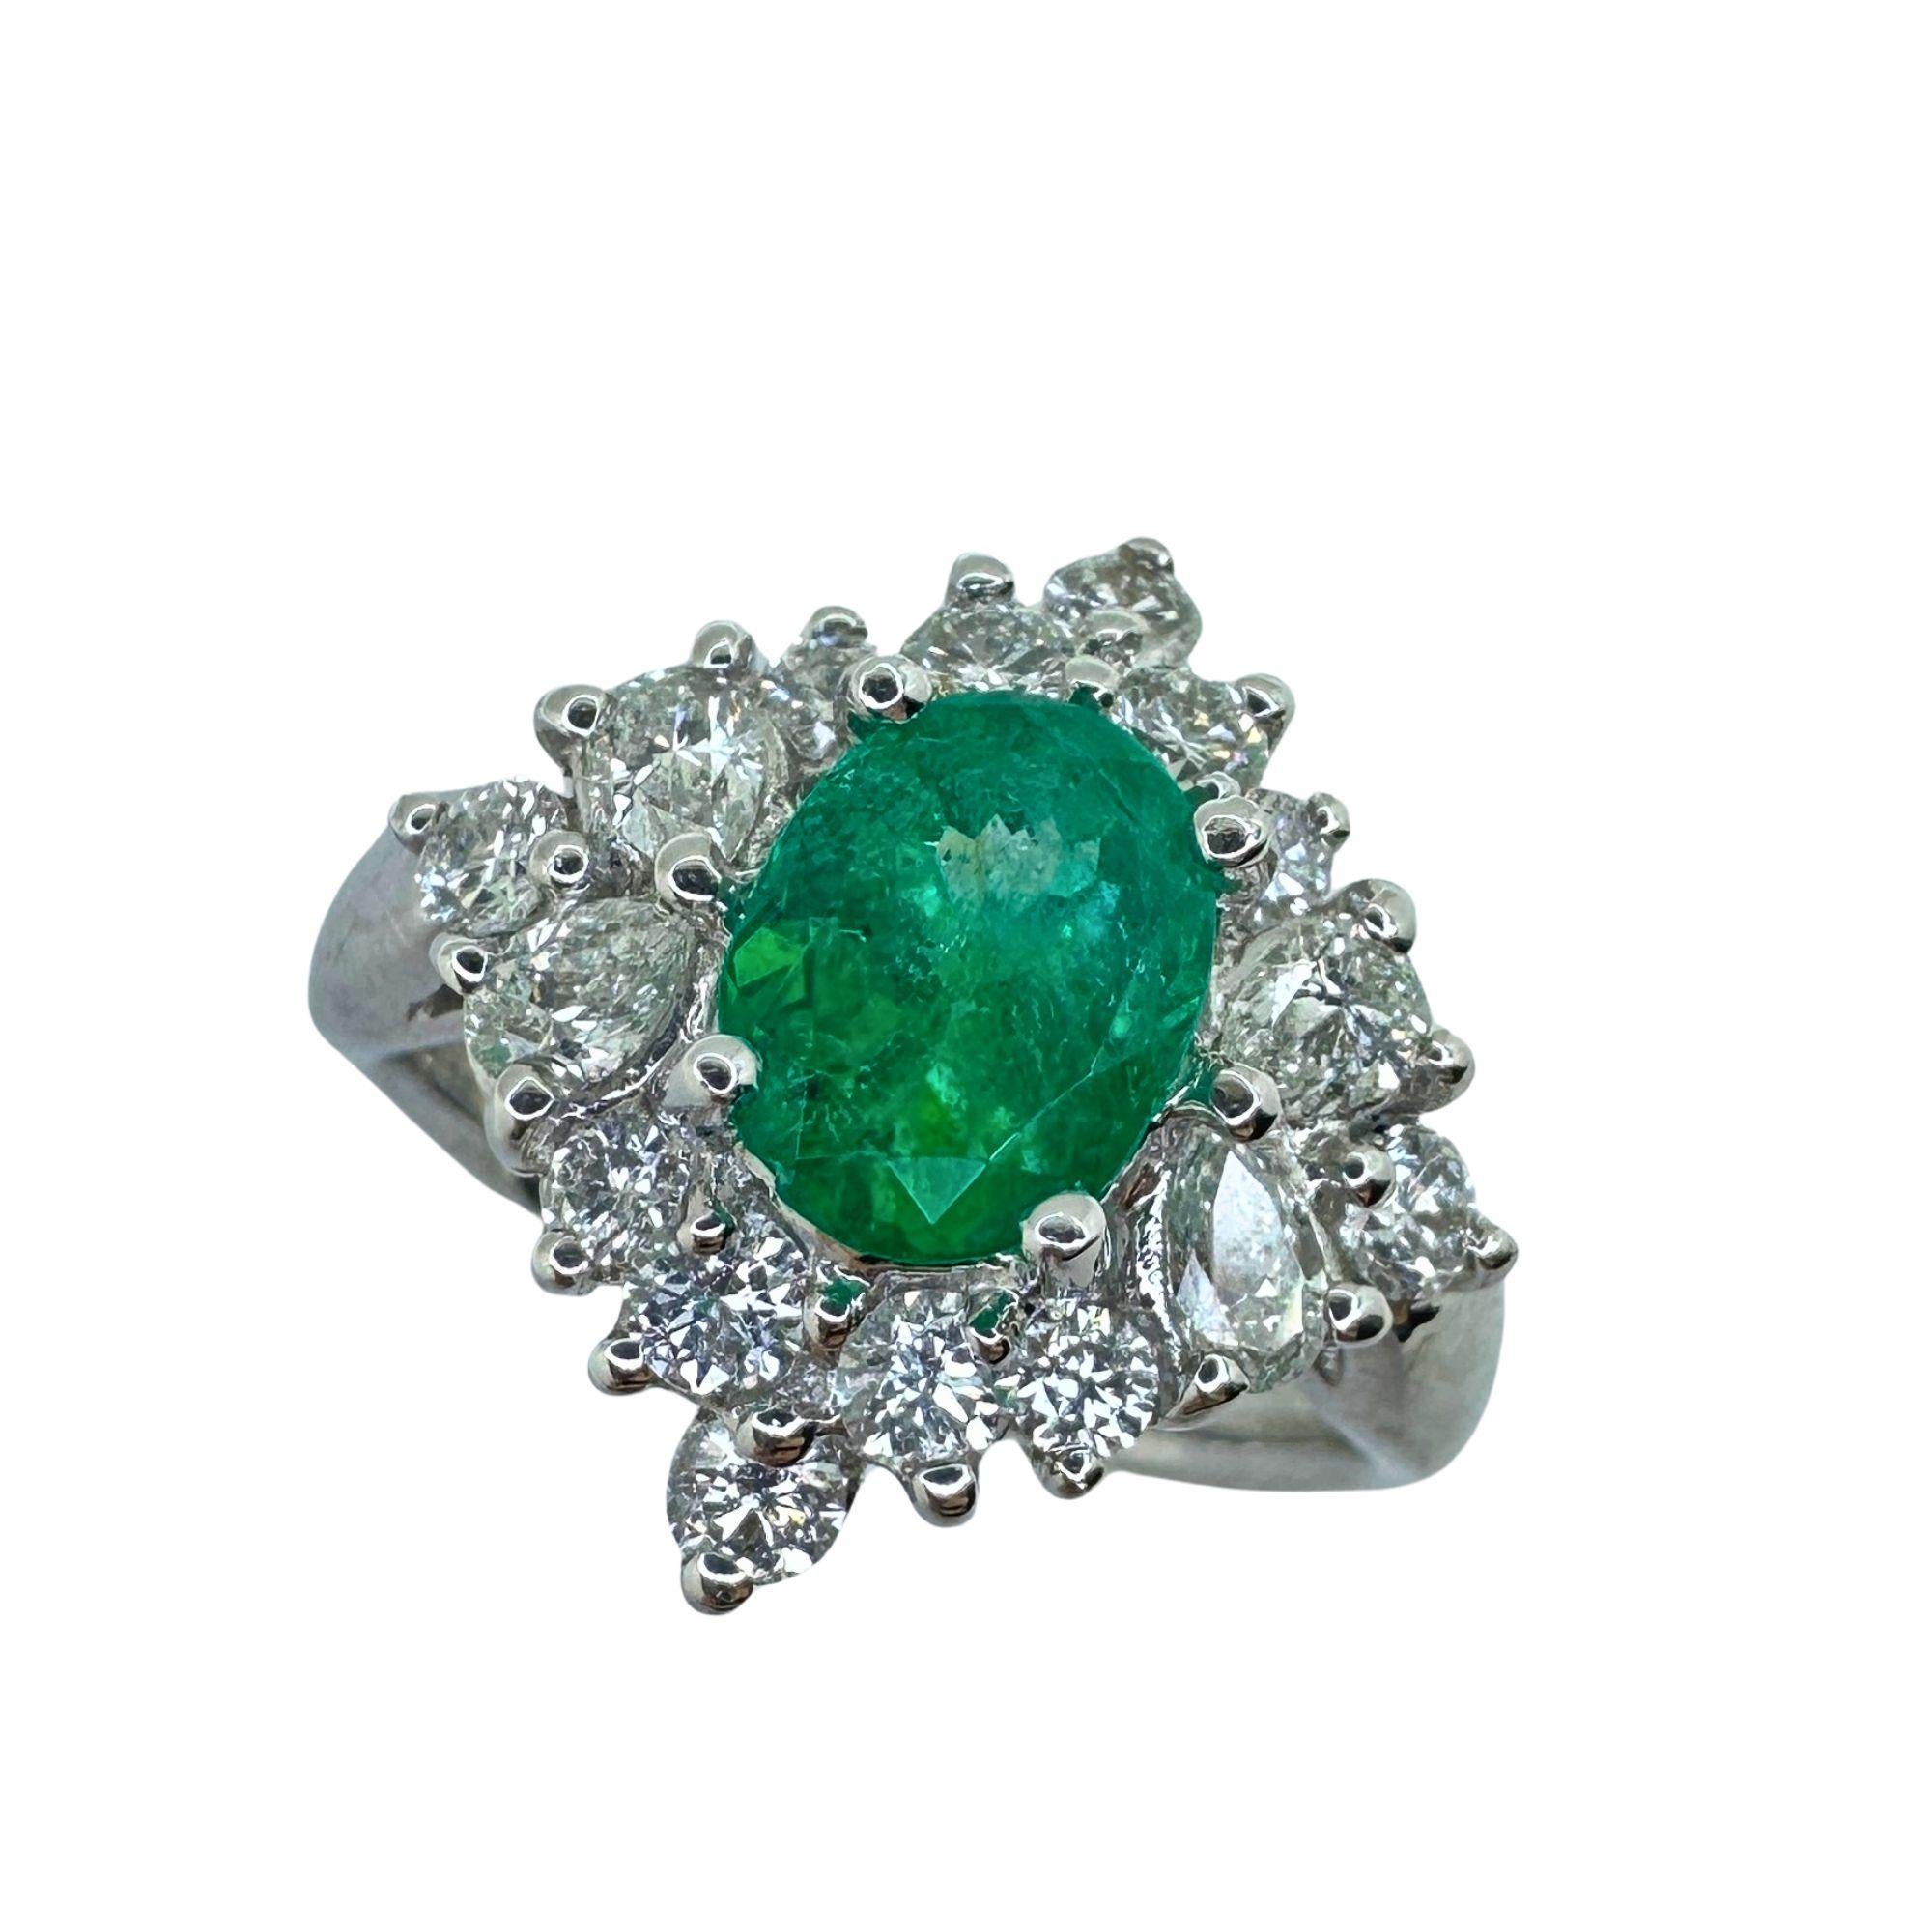 Experience luxury and elegance with our 18k Diamond and Emerald Ring. This exquisite piece features a stunning 0.89 carats of diamonds and a dazzling 1.19 carat emerald center. With a ring size of 6.75 and a weight of 5.61 grams, this ring is a true